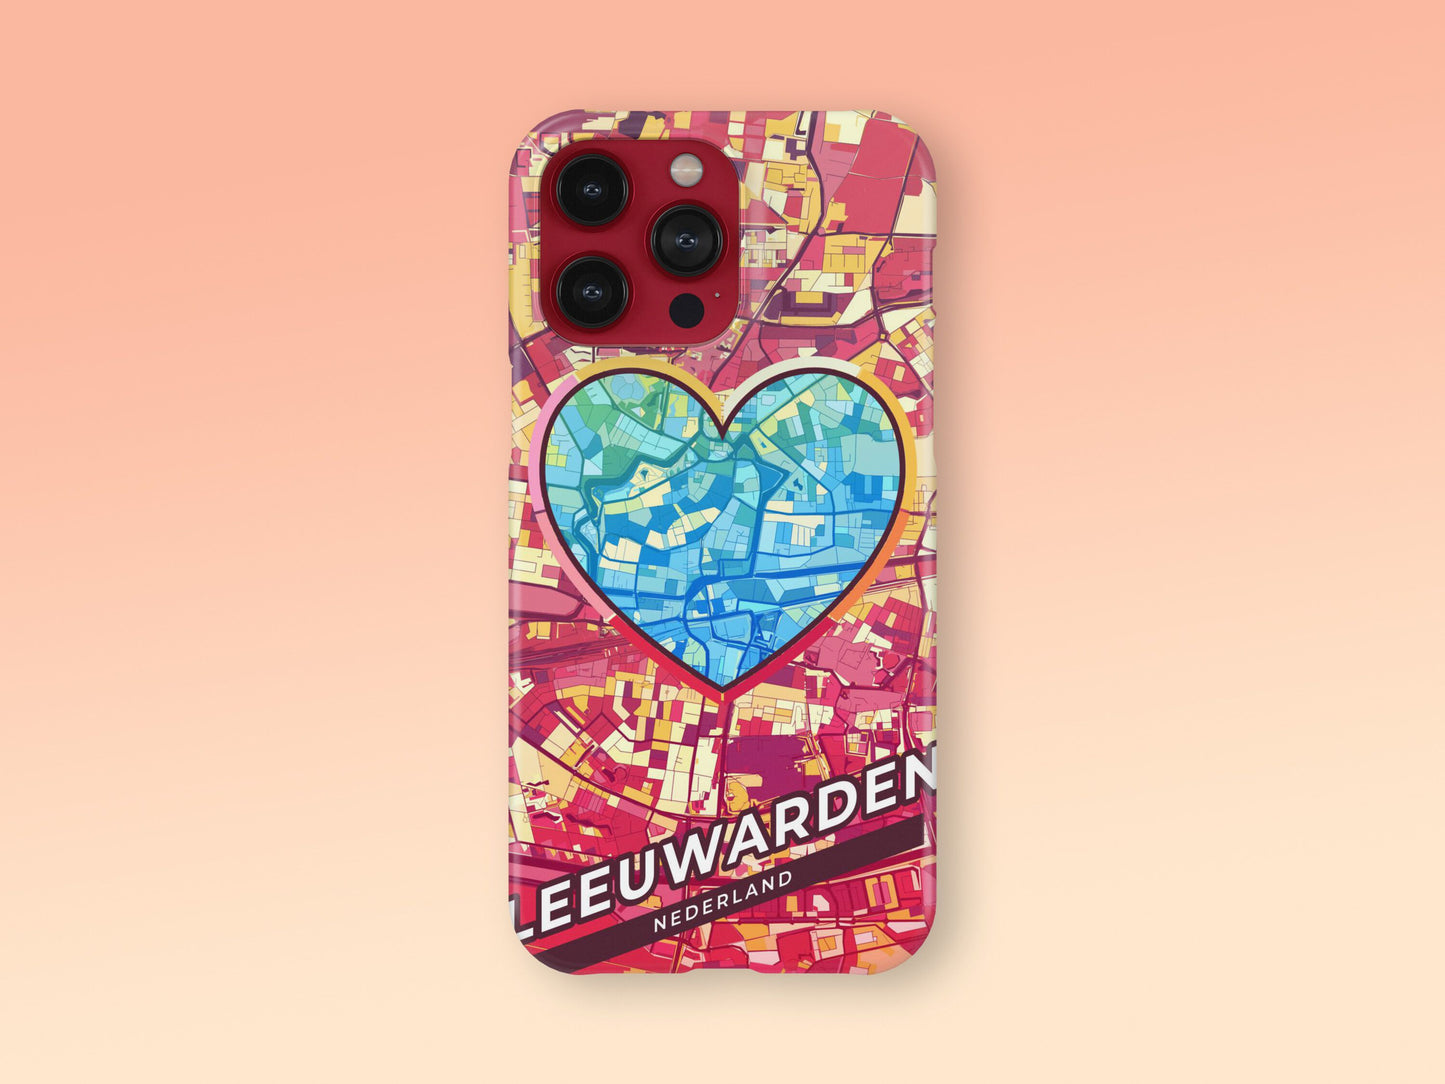 Leeuwarden Netherlands slim phone case with colorful icon. Birthday, wedding or housewarming gift. Couple match cases. 2